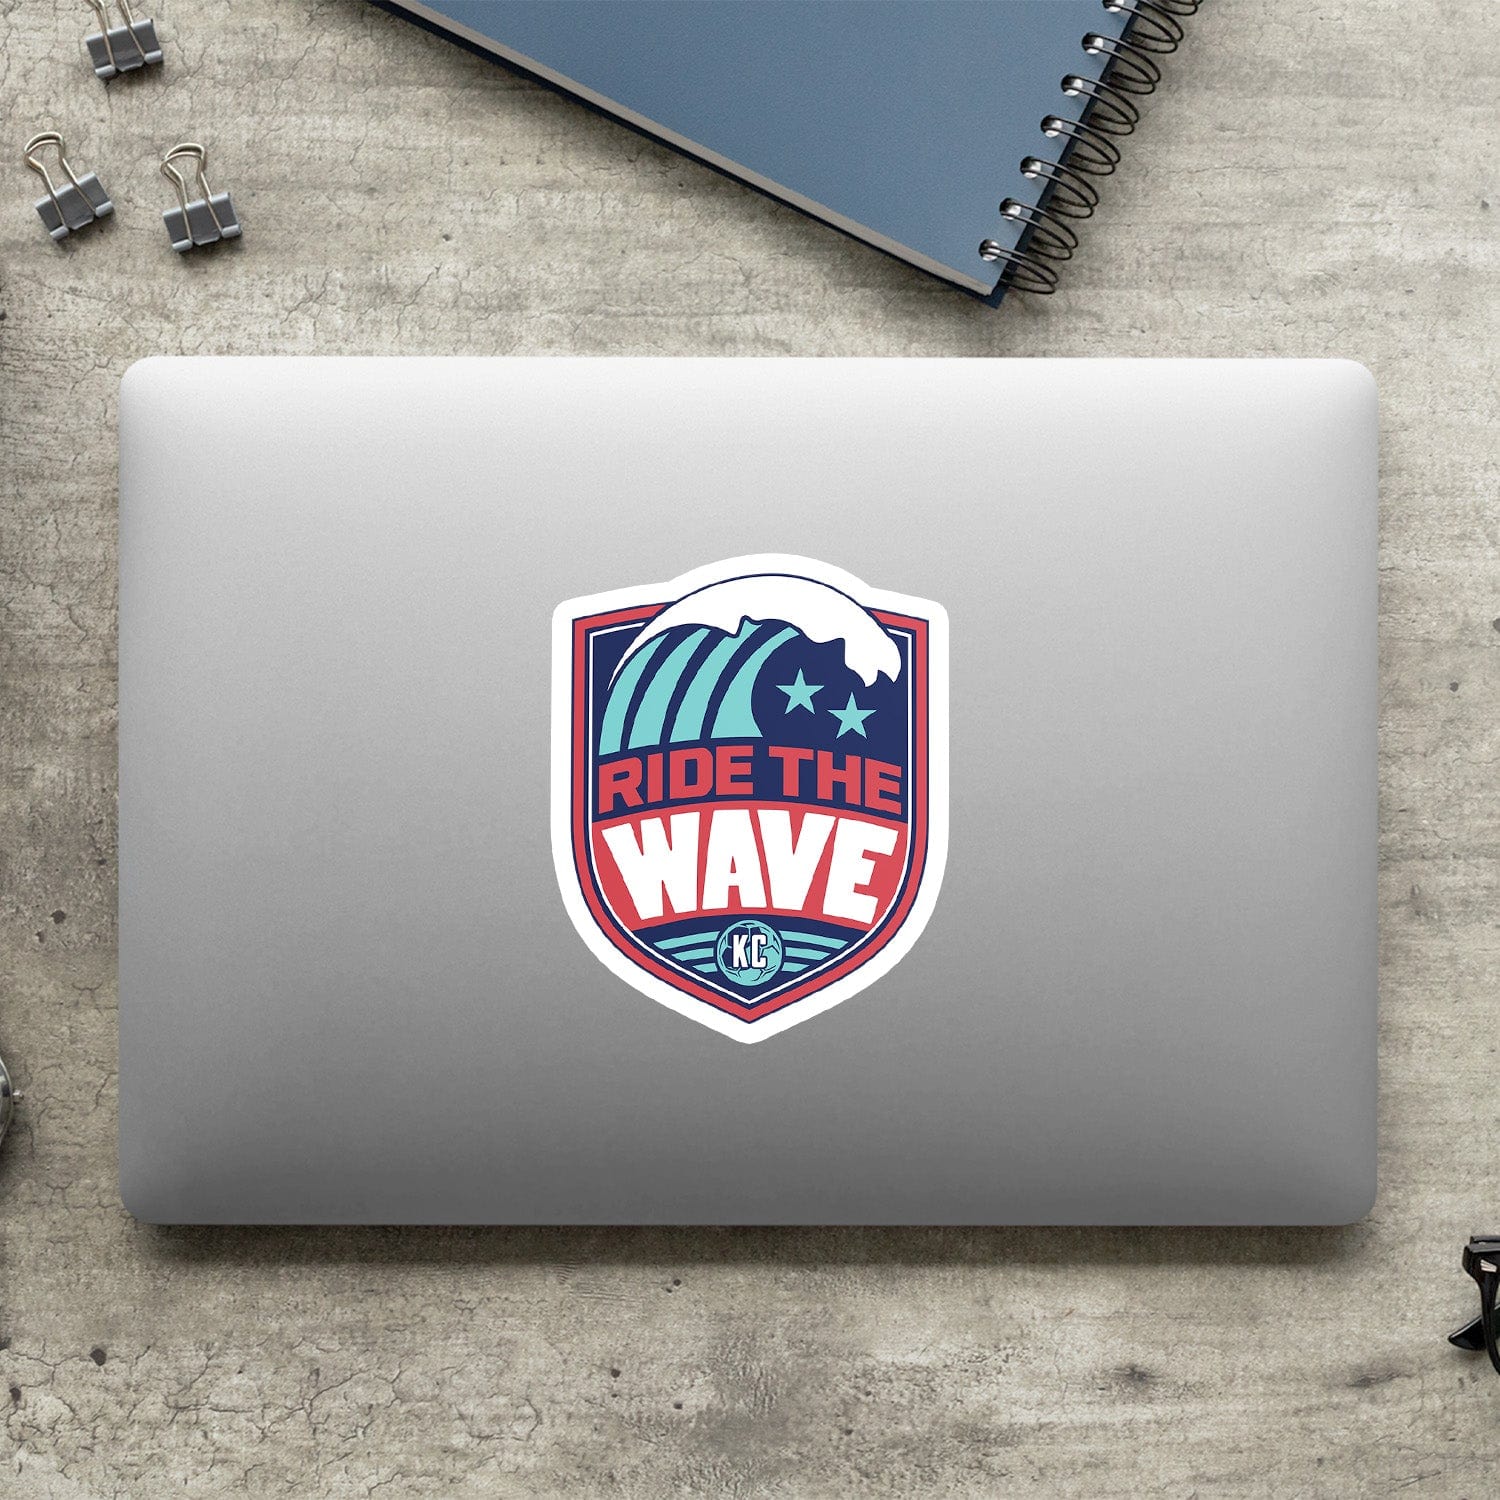 KC Swag Kansas City Current RIDE THE WAVE die-cut sticker decal made from waterproof vinyl on closed laptop back 